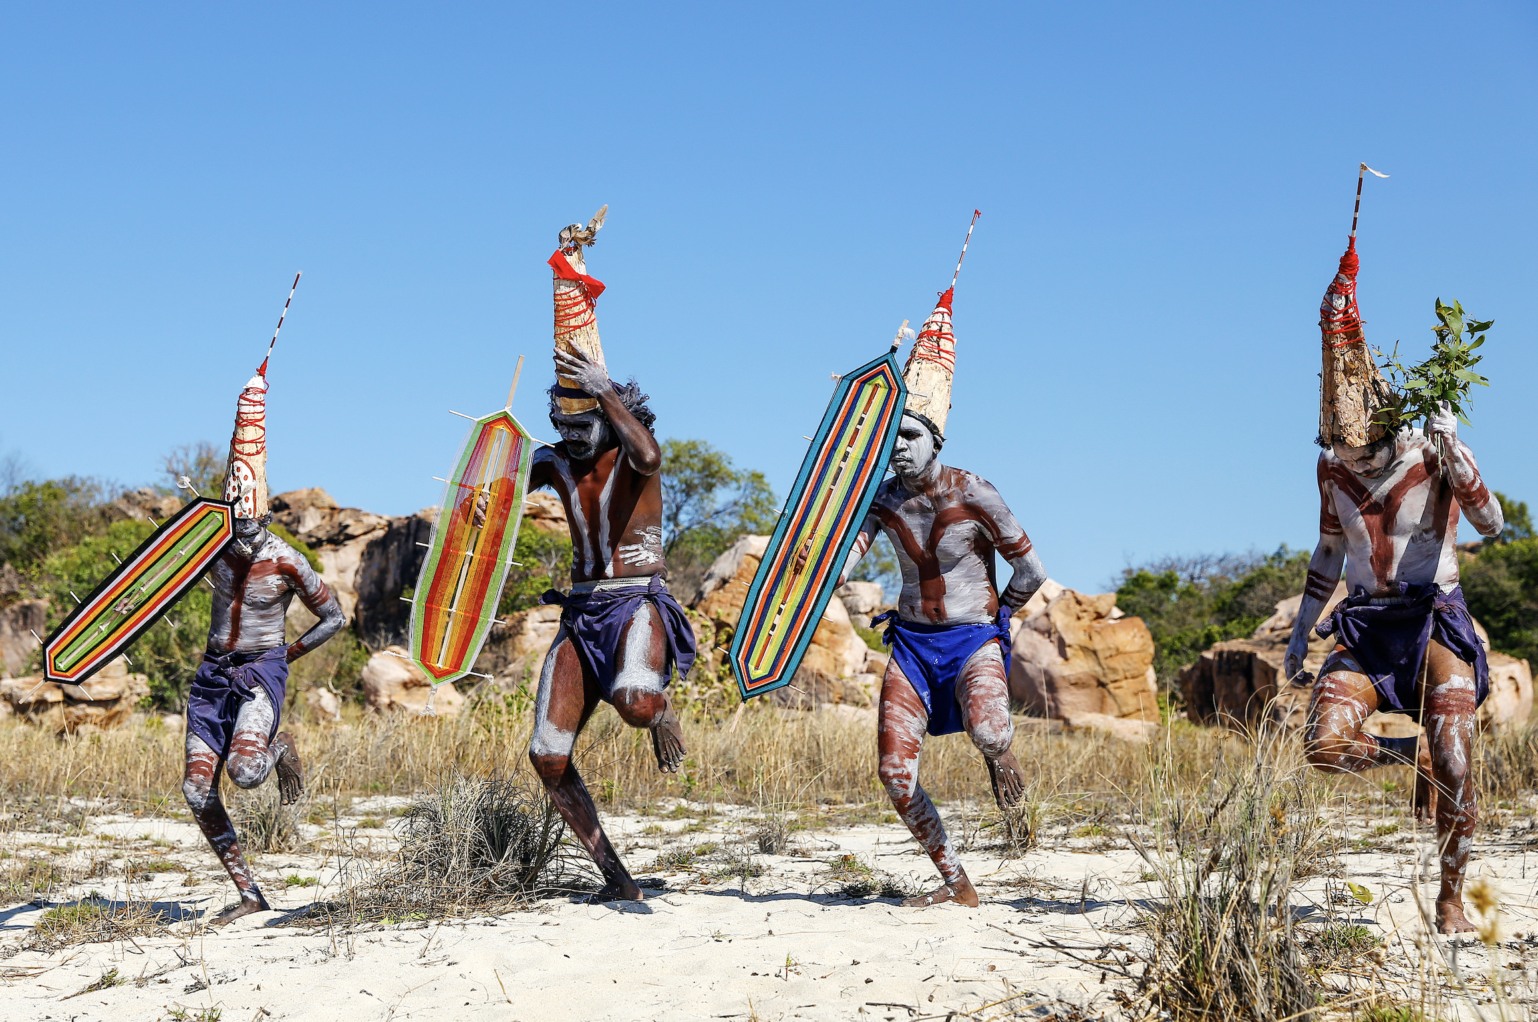 The Indigenous community in the Kimberley